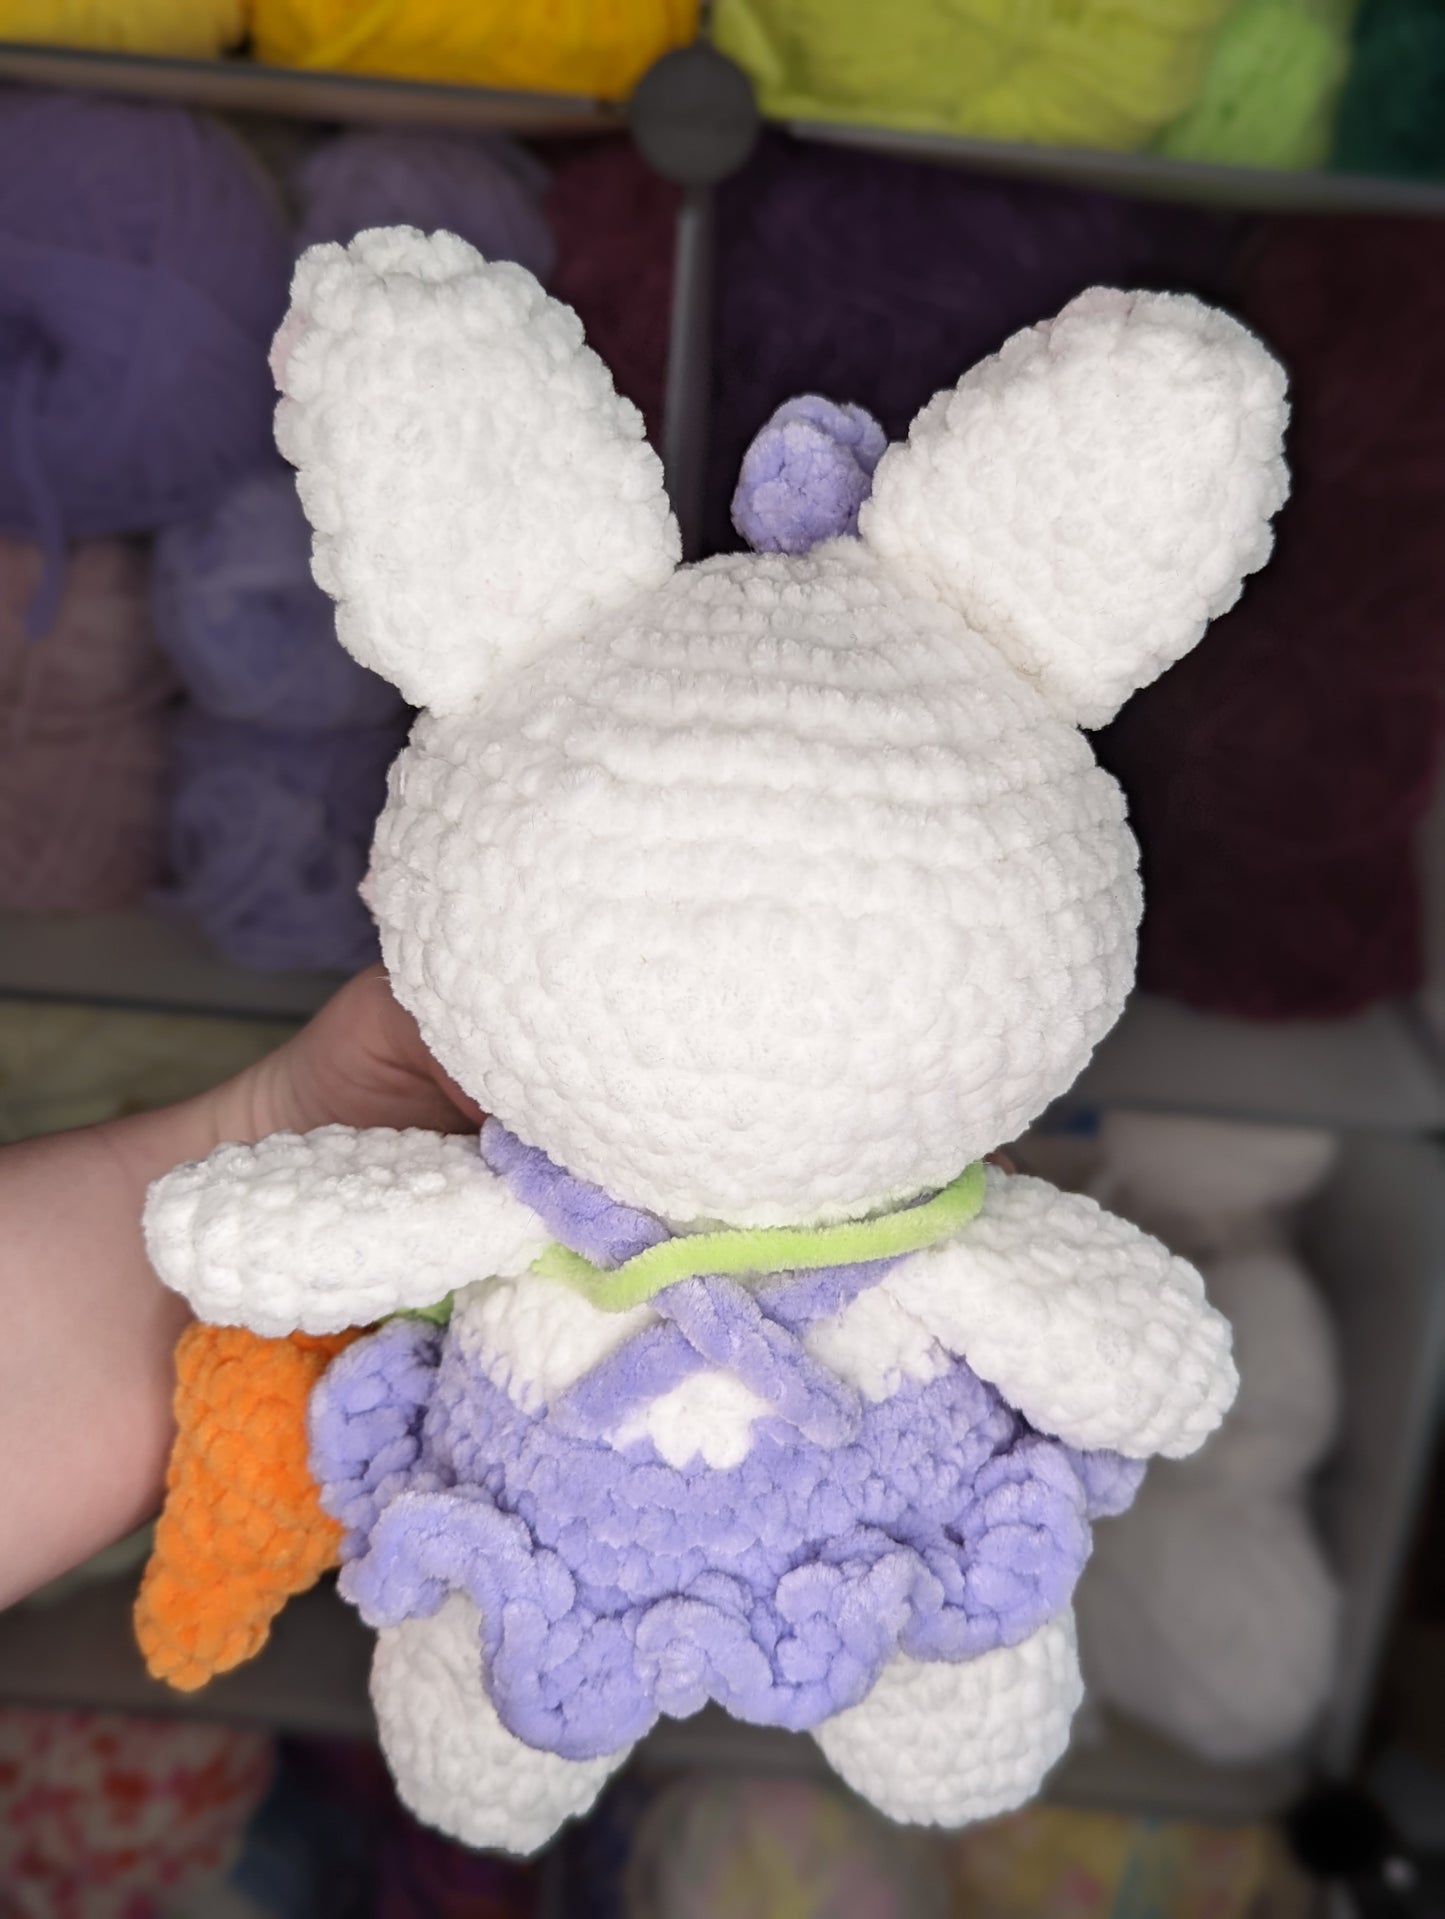 Bunny Wearing Dress Crochet Plushie [Archived]